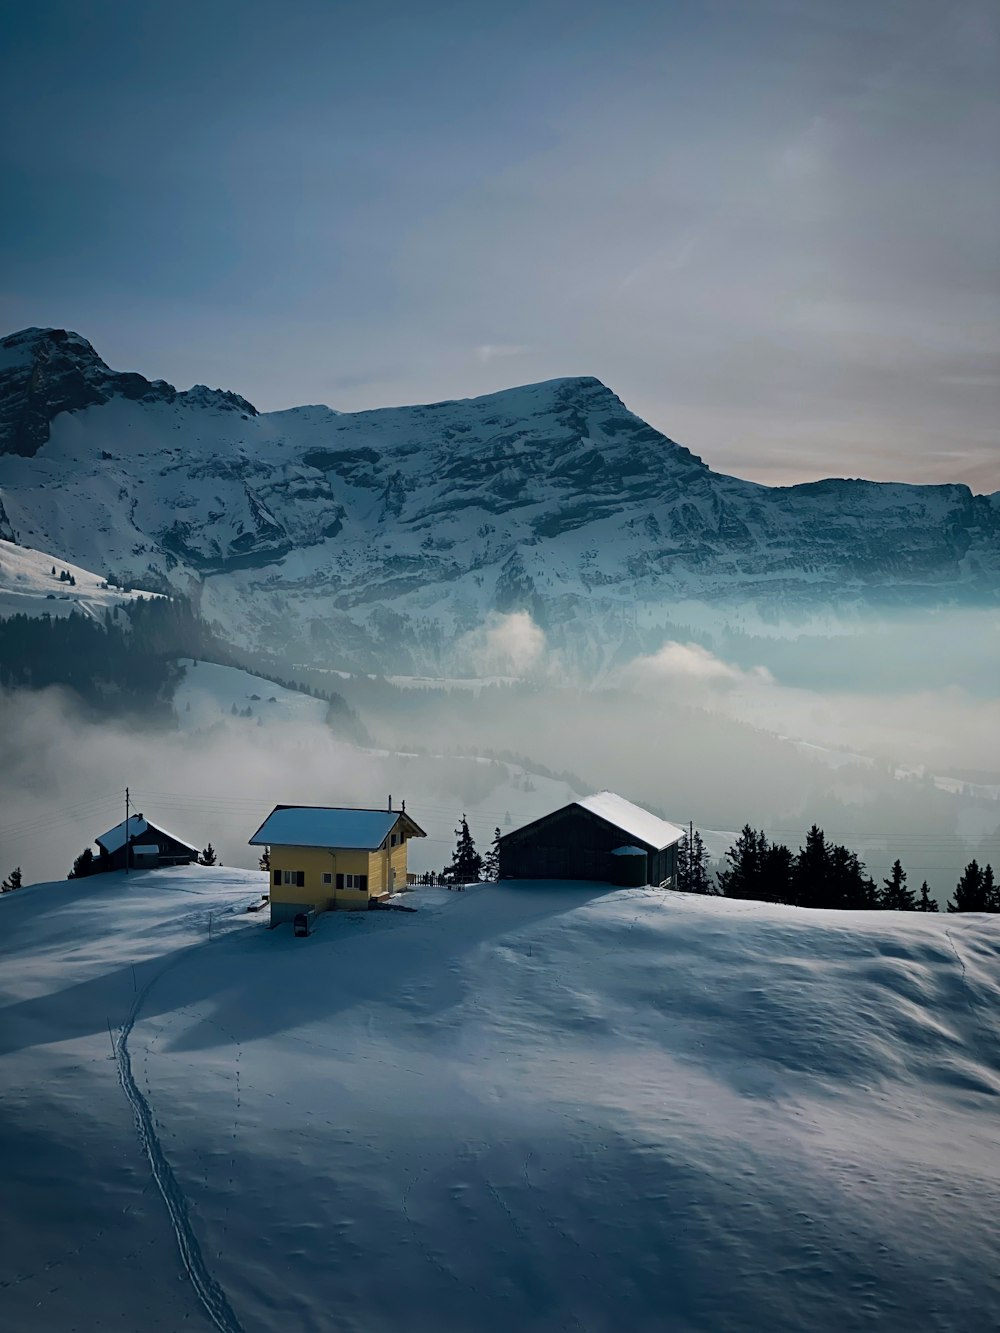 a house on a snowy hill with a mountain in the background